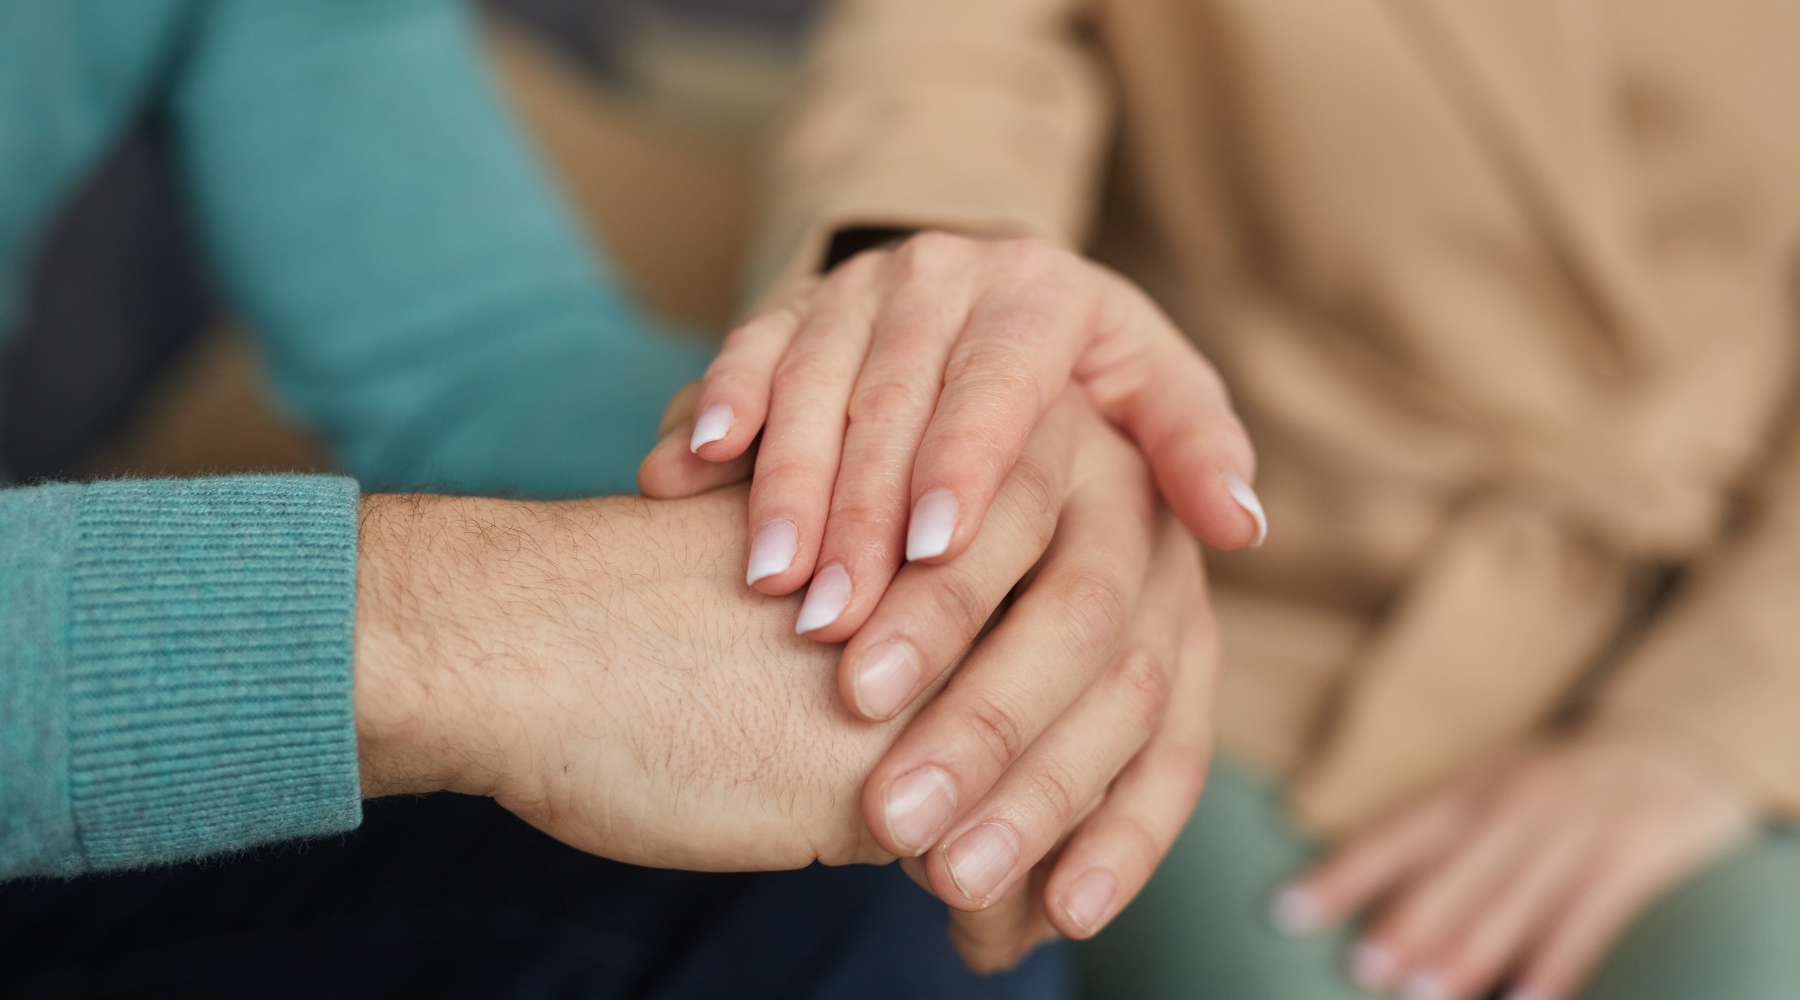 A woman's hand on top of a man's hand showing empathy and support